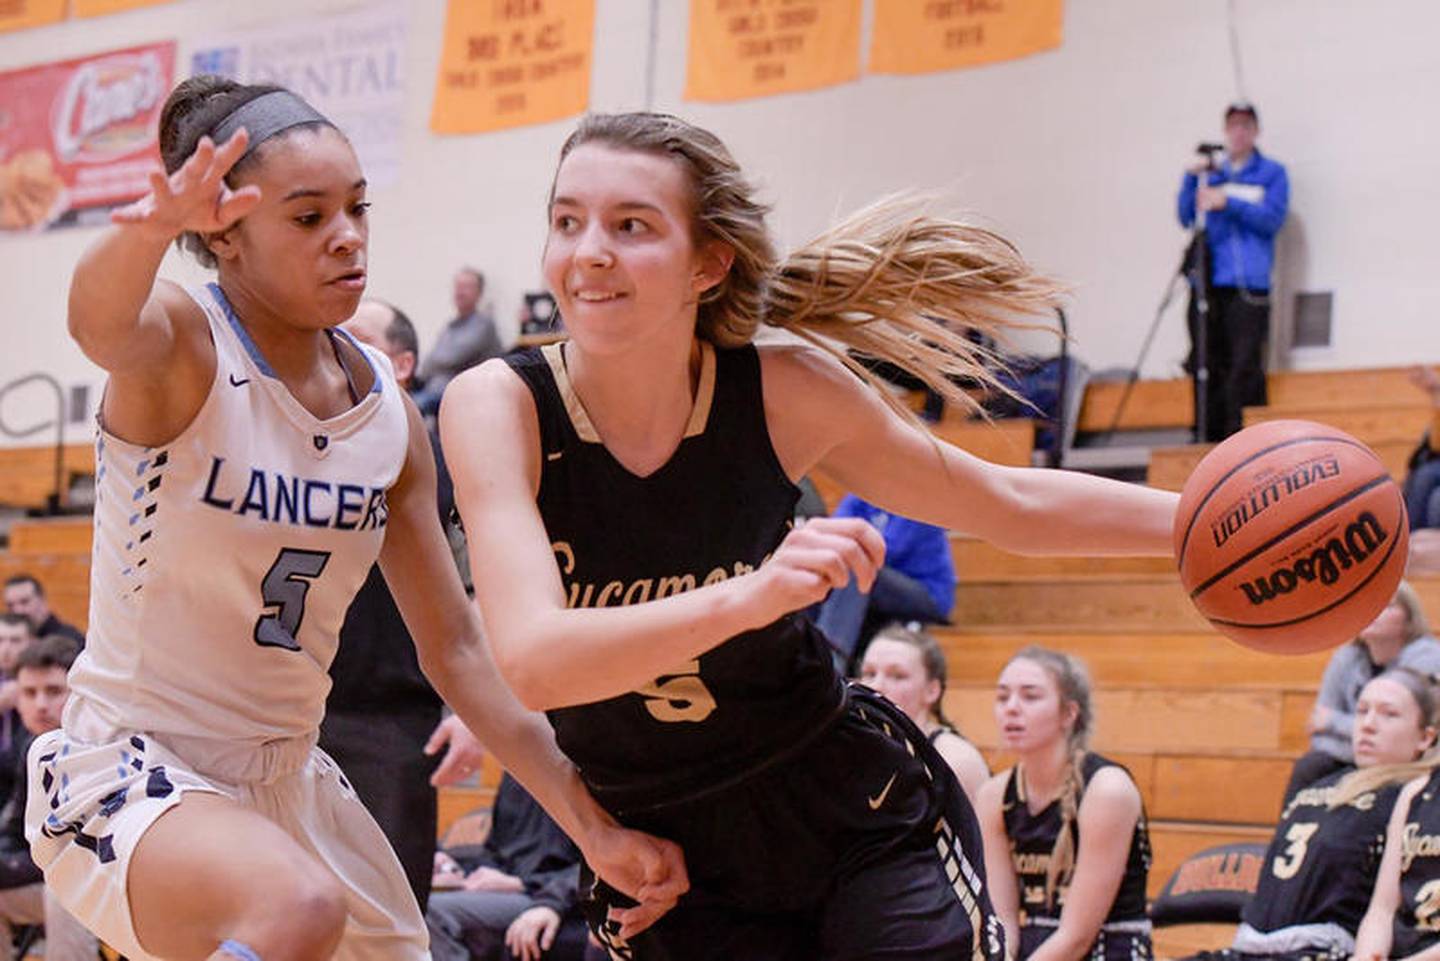 Lake Park's Gabi Burgess (5) guards Sycamore's Faith Feuerbach (5) as she drives toward the basket during the Inaugural MLK Day Conference Challenge at Batavia High School on Monday, Jan. 20, 2020 in Batavia.